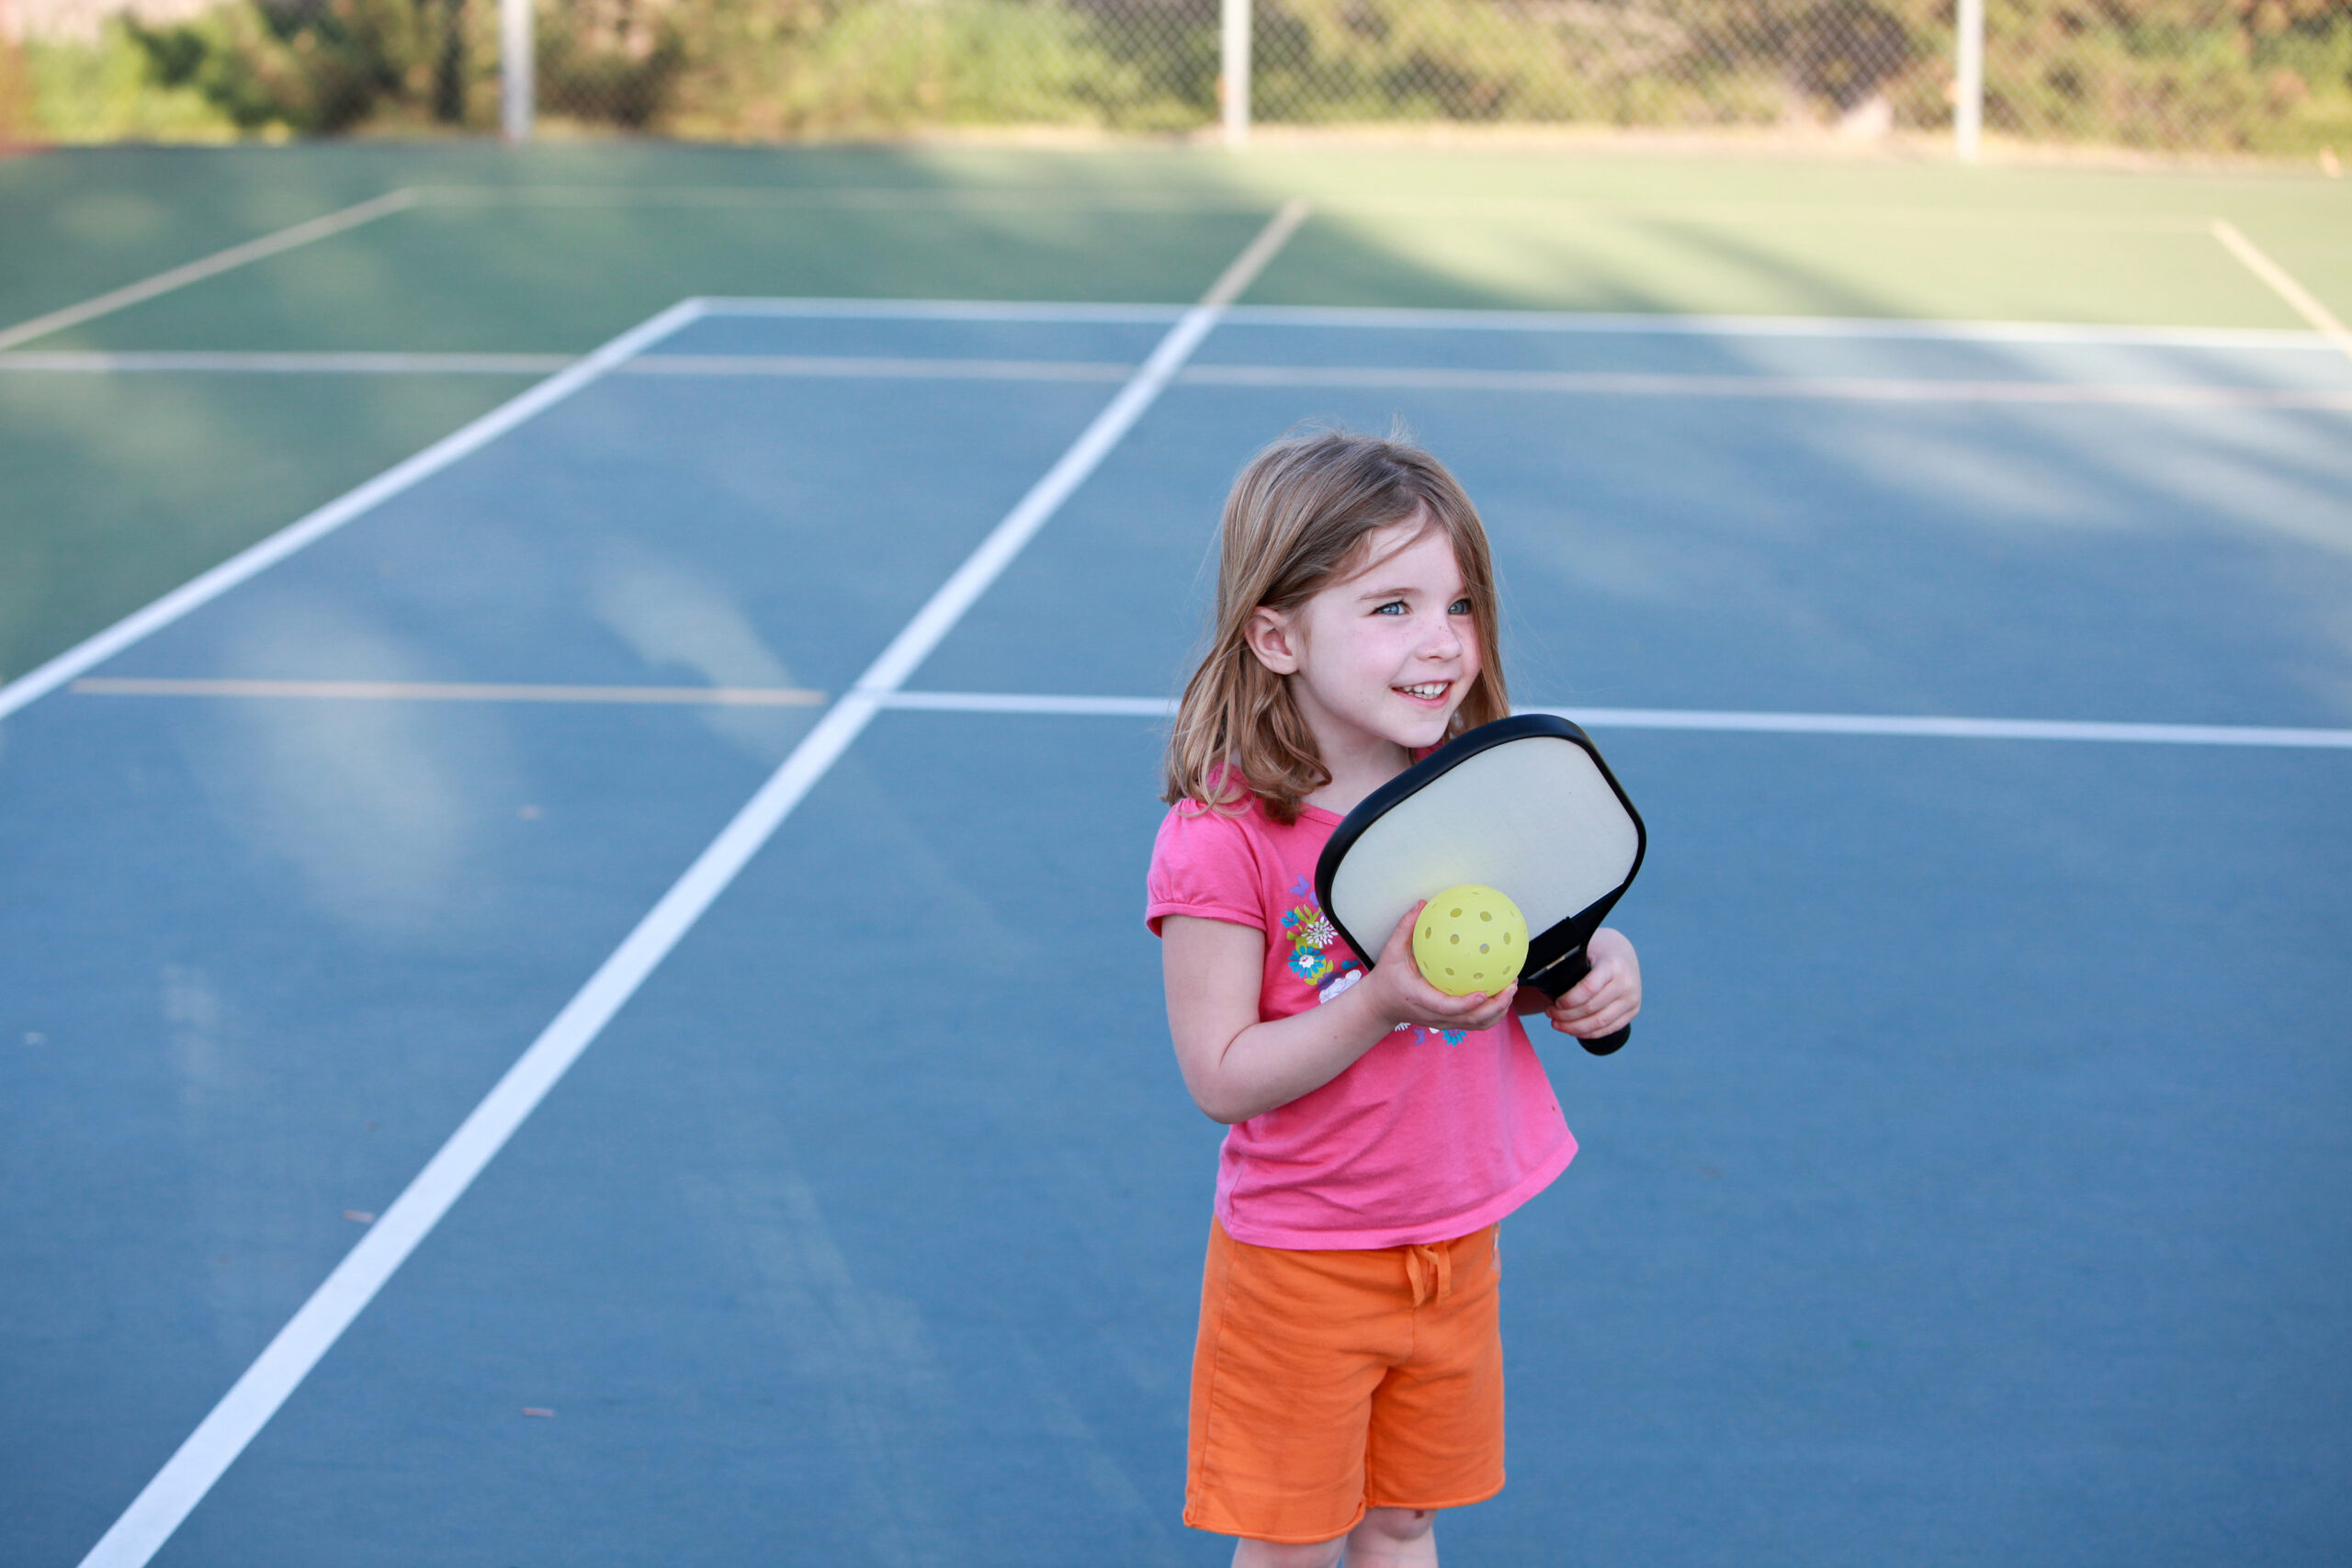 Young,Girl,Playing,Pickleball,On,An,Outdoor,Court.